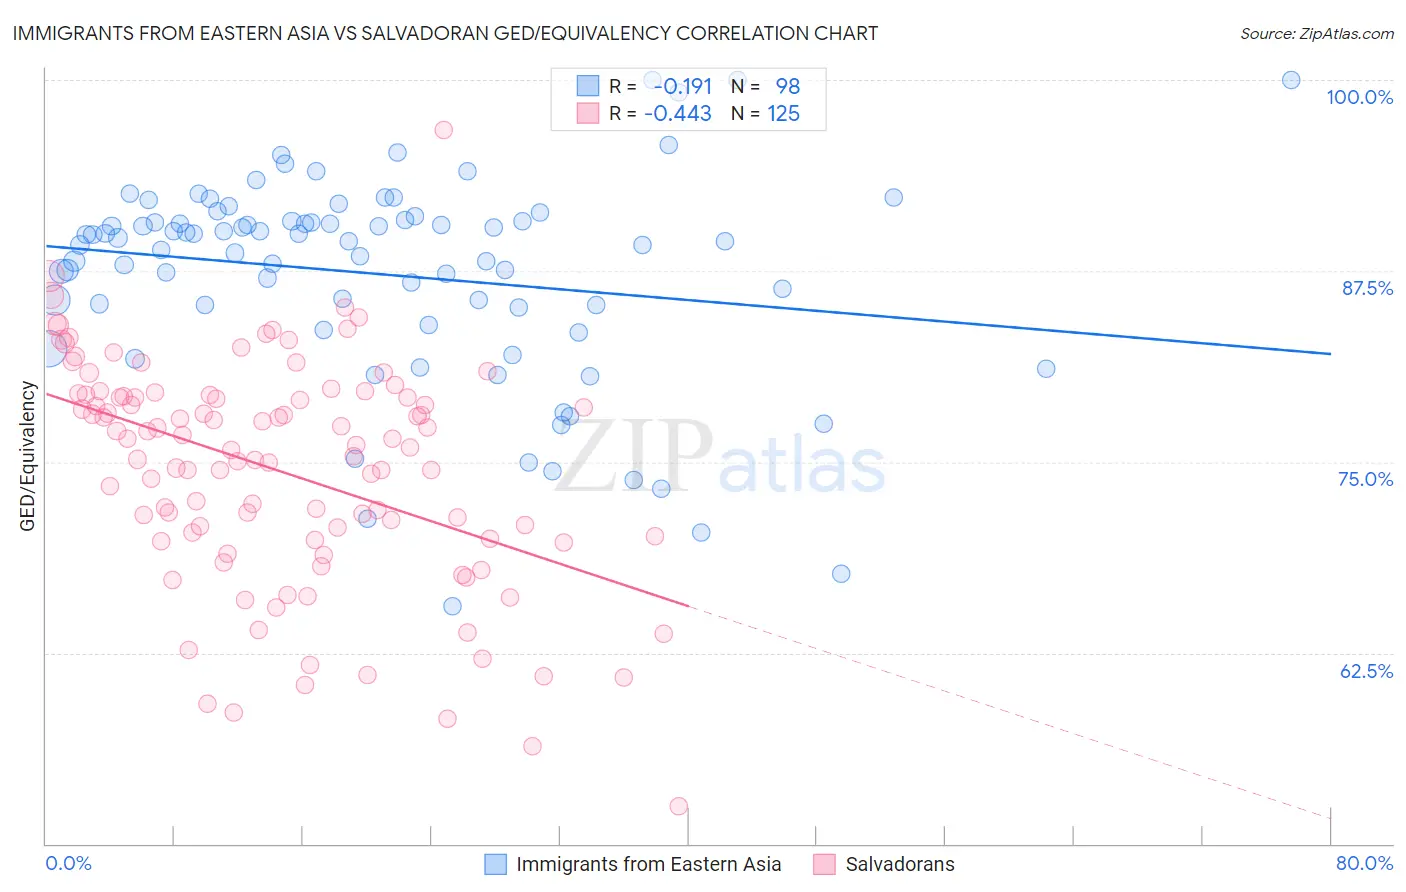 Immigrants from Eastern Asia vs Salvadoran GED/Equivalency